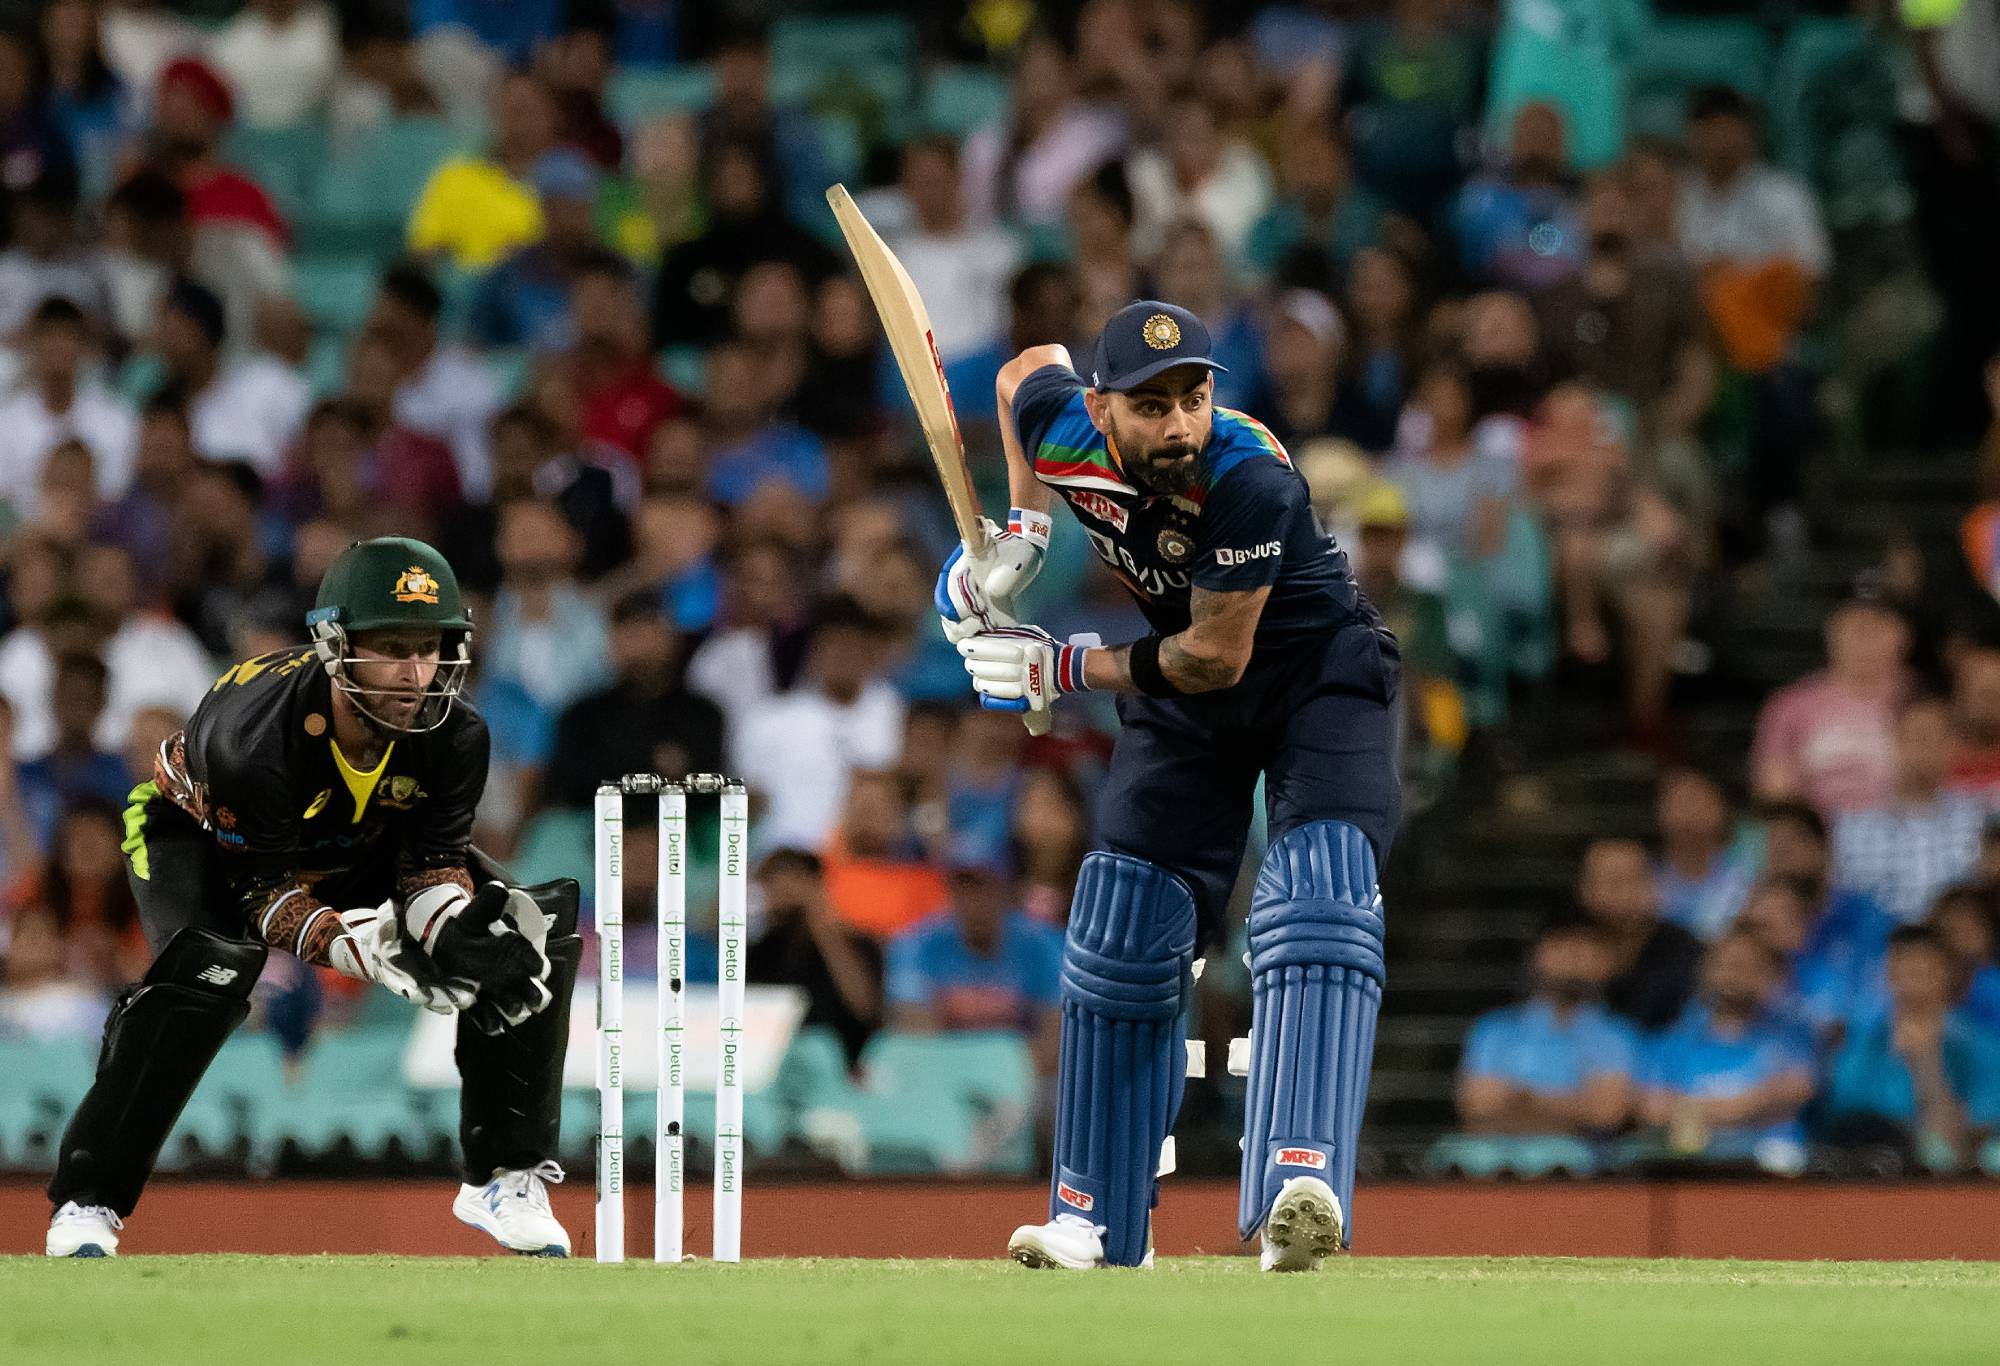 SYDNEY, AUSTRALIA - DECEMBER 07: Virat Kohli of India hits the ball during the Dettol T20 Series cricket match between Australia and India at the Sydney Cricket Ground on December 07, 2020 in Sydney, Australia. (Photo by Speed Media/Icon Sportswire via Getty Images)